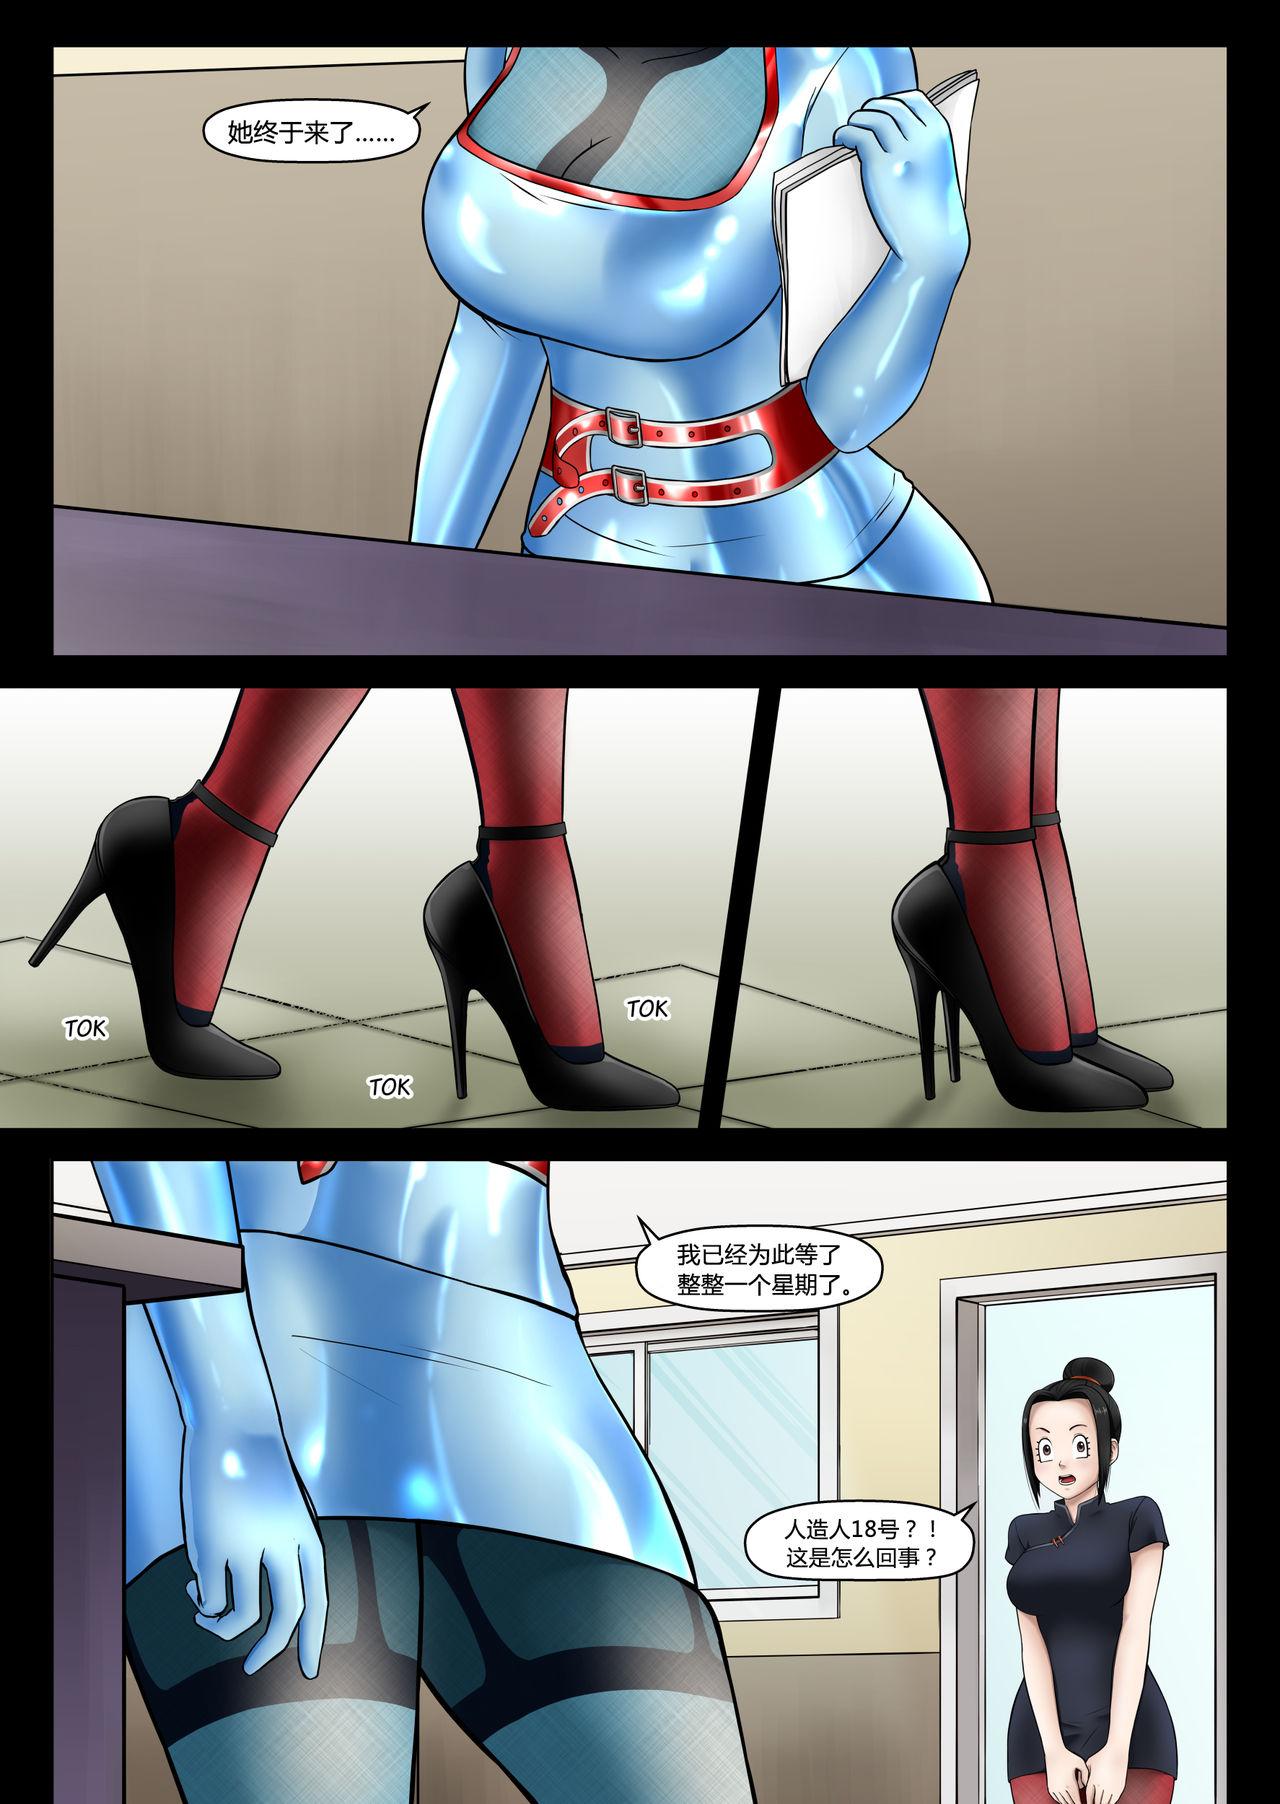 Liveshow Chi-Chi's Asylum Visit Clothed - Page 4